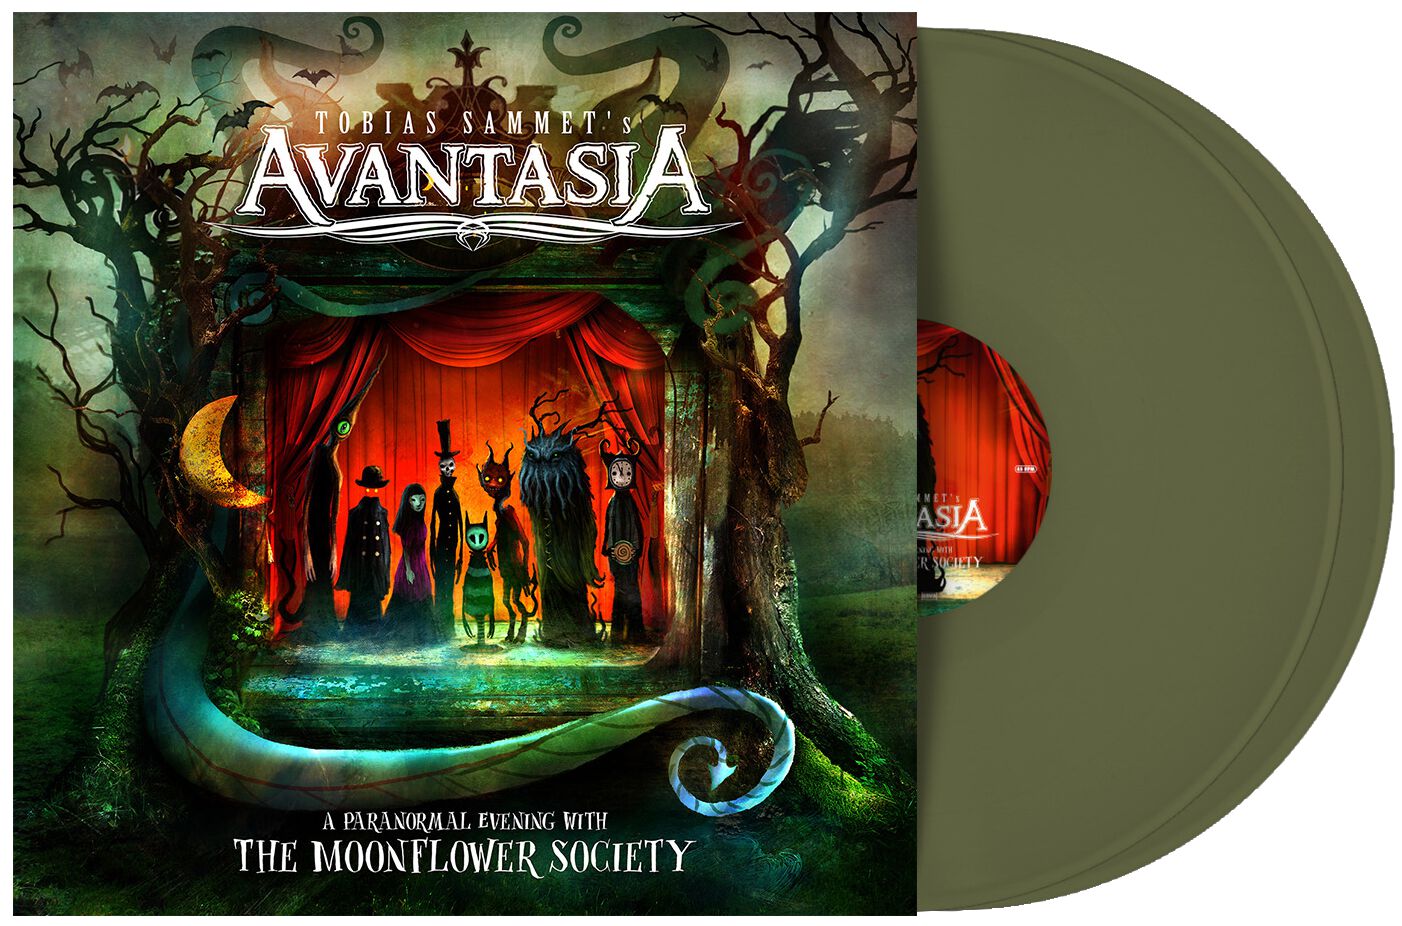 A paranormal evening with the moonflower society von Avantasia - 2-LP (Coloured, Gatefold, Limited Edition)